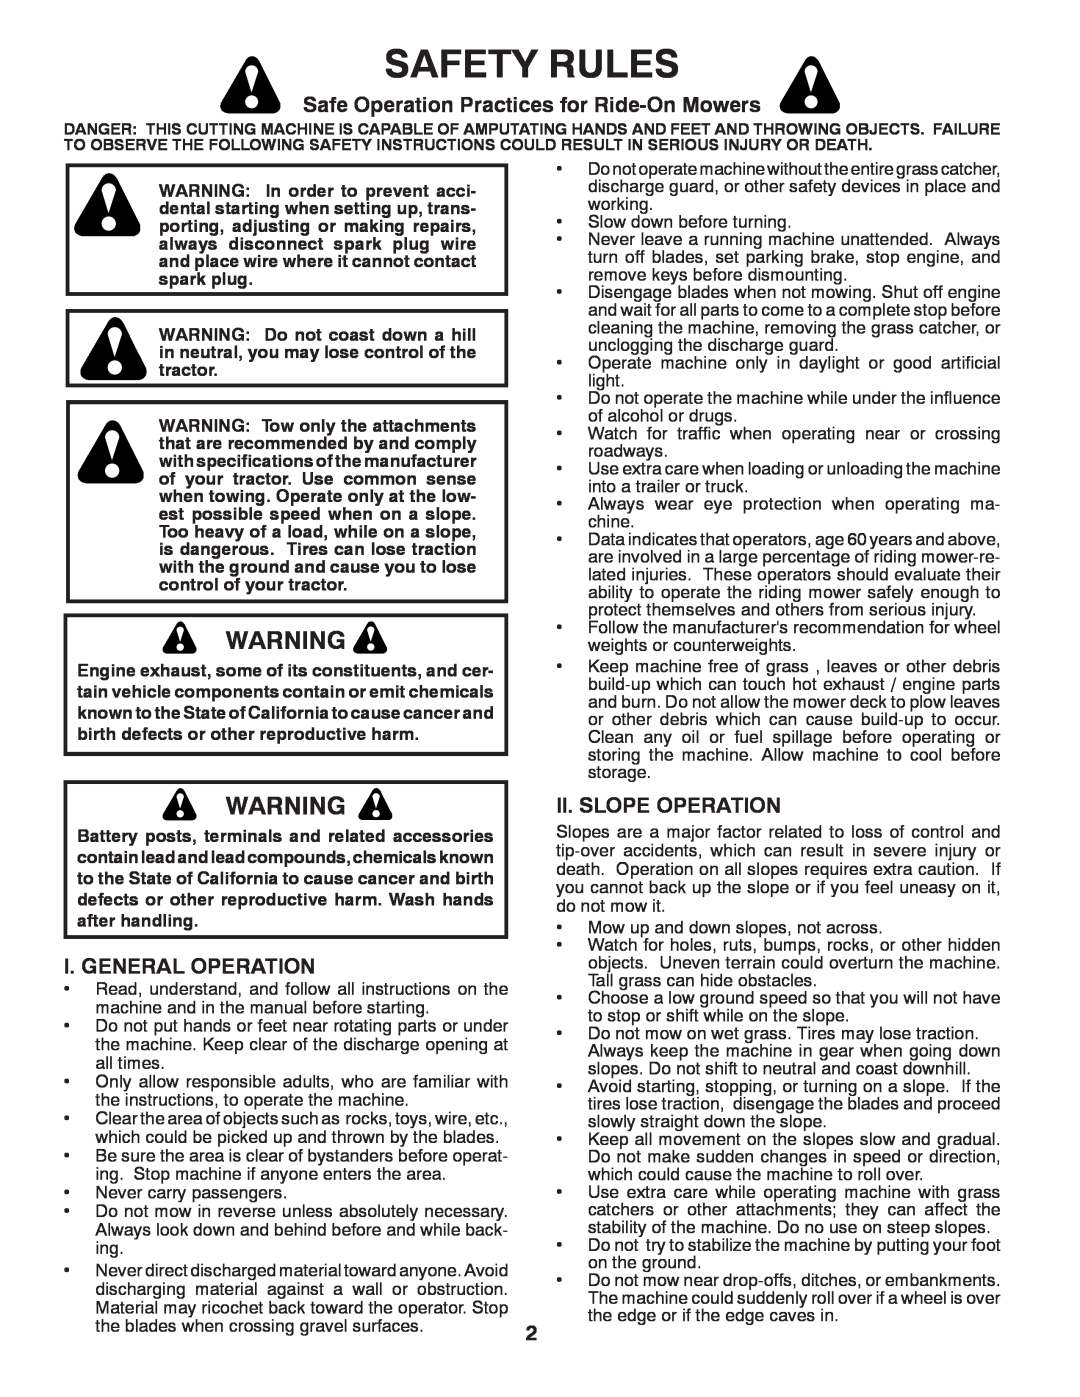 Poulan PBA19542LT Safety Rules, Safe Operation Practices for Ride-OnMowers, I. General Operation, Ii. Slope Operation 